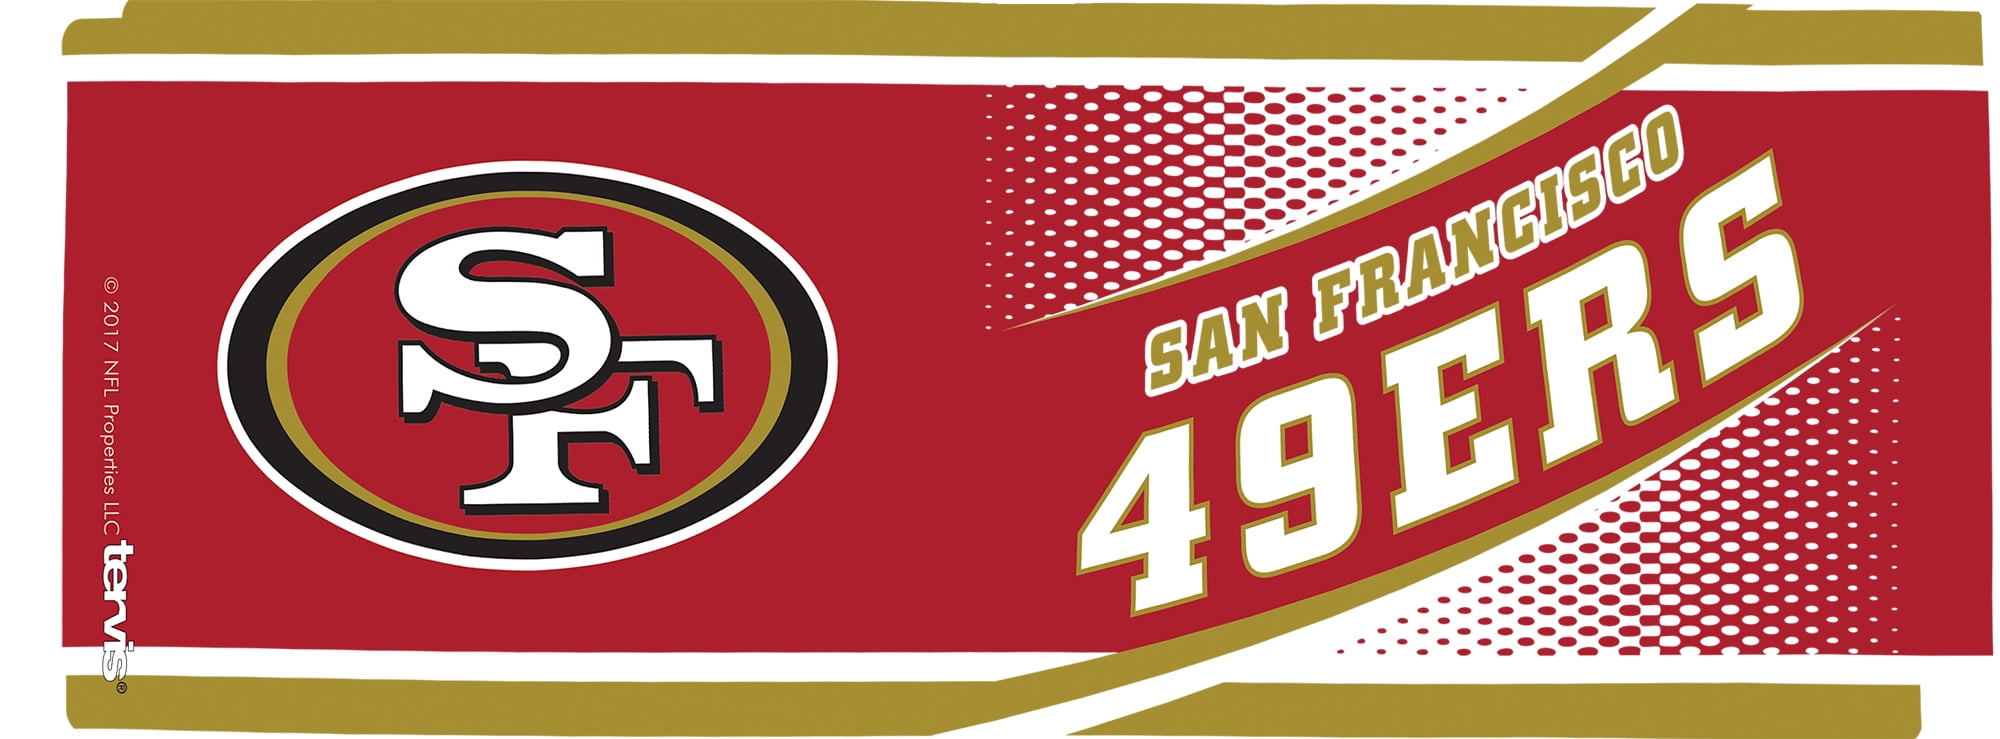 Tervis NFL® San Francisco 49ers Insulated Tumbler 